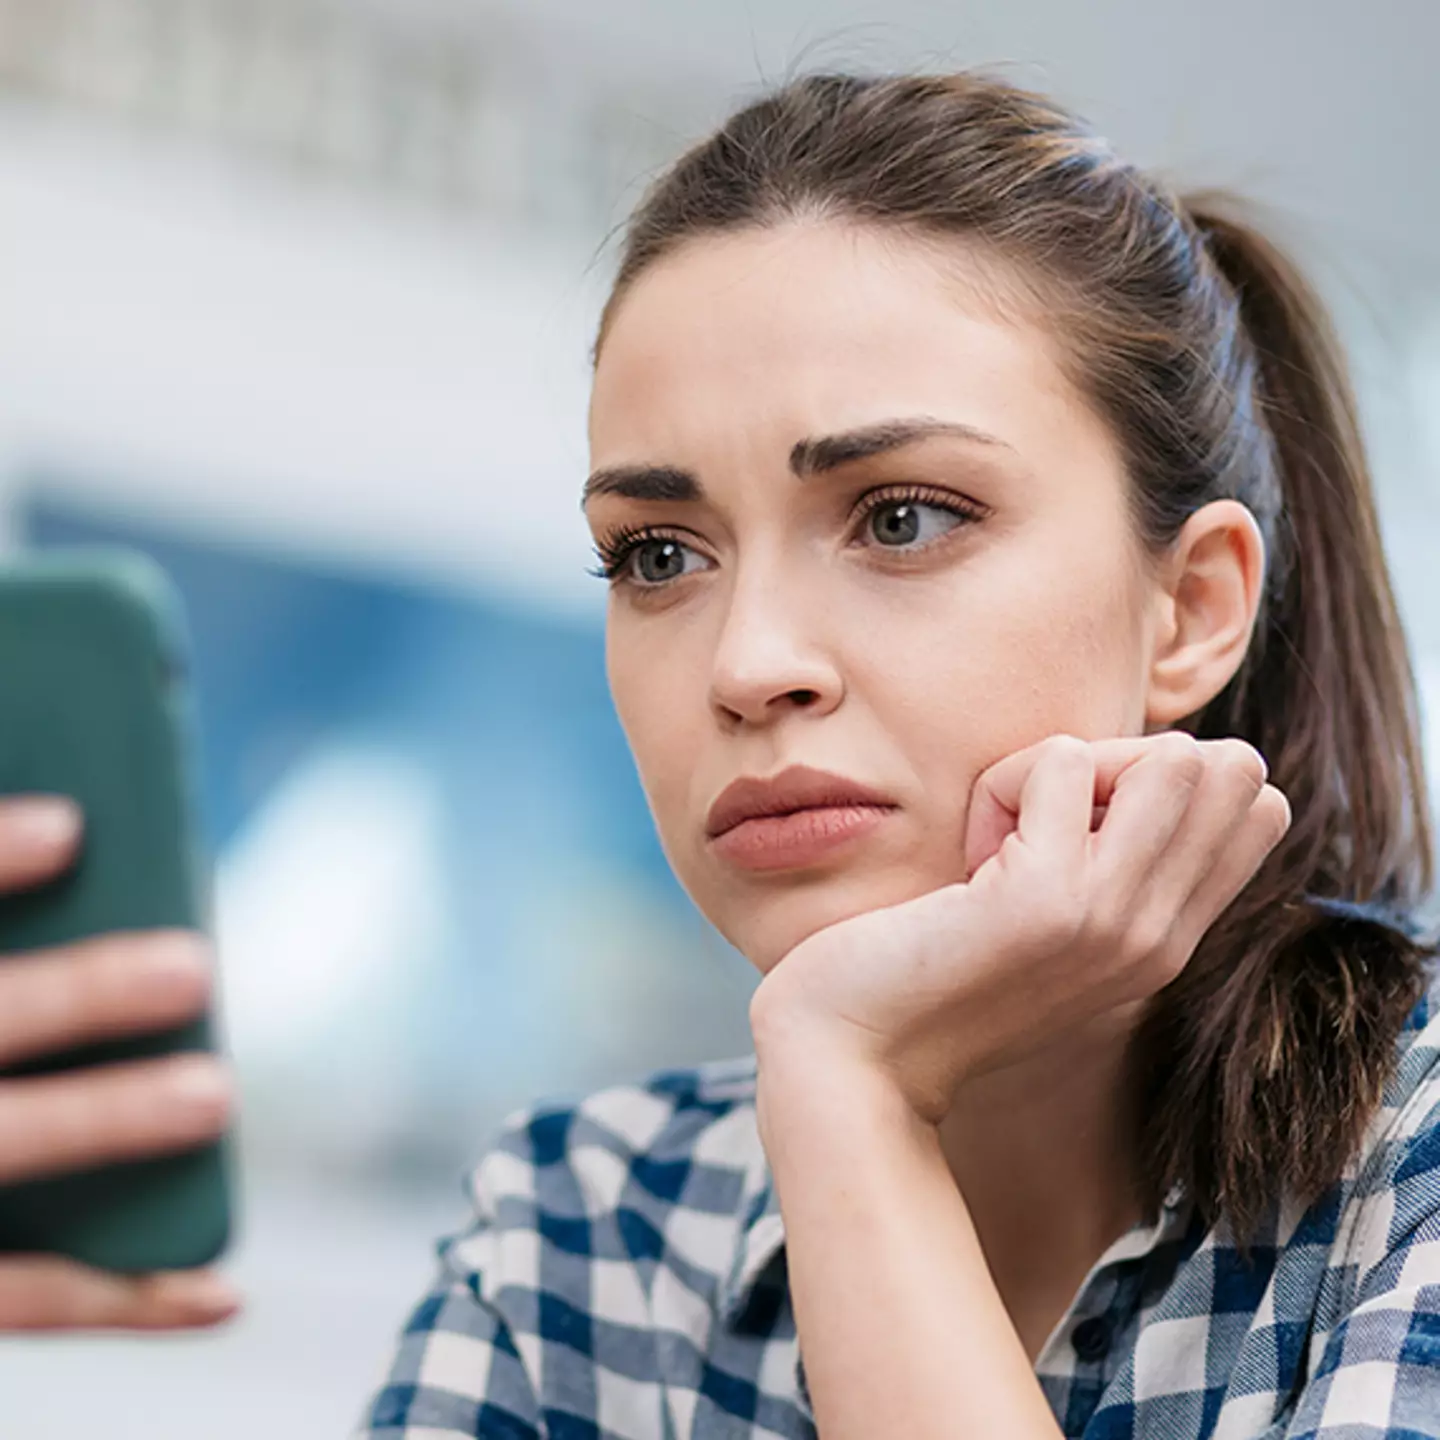 Women issue urgent warning to dating app users after horrific scammer ‘totally ruins their lives’